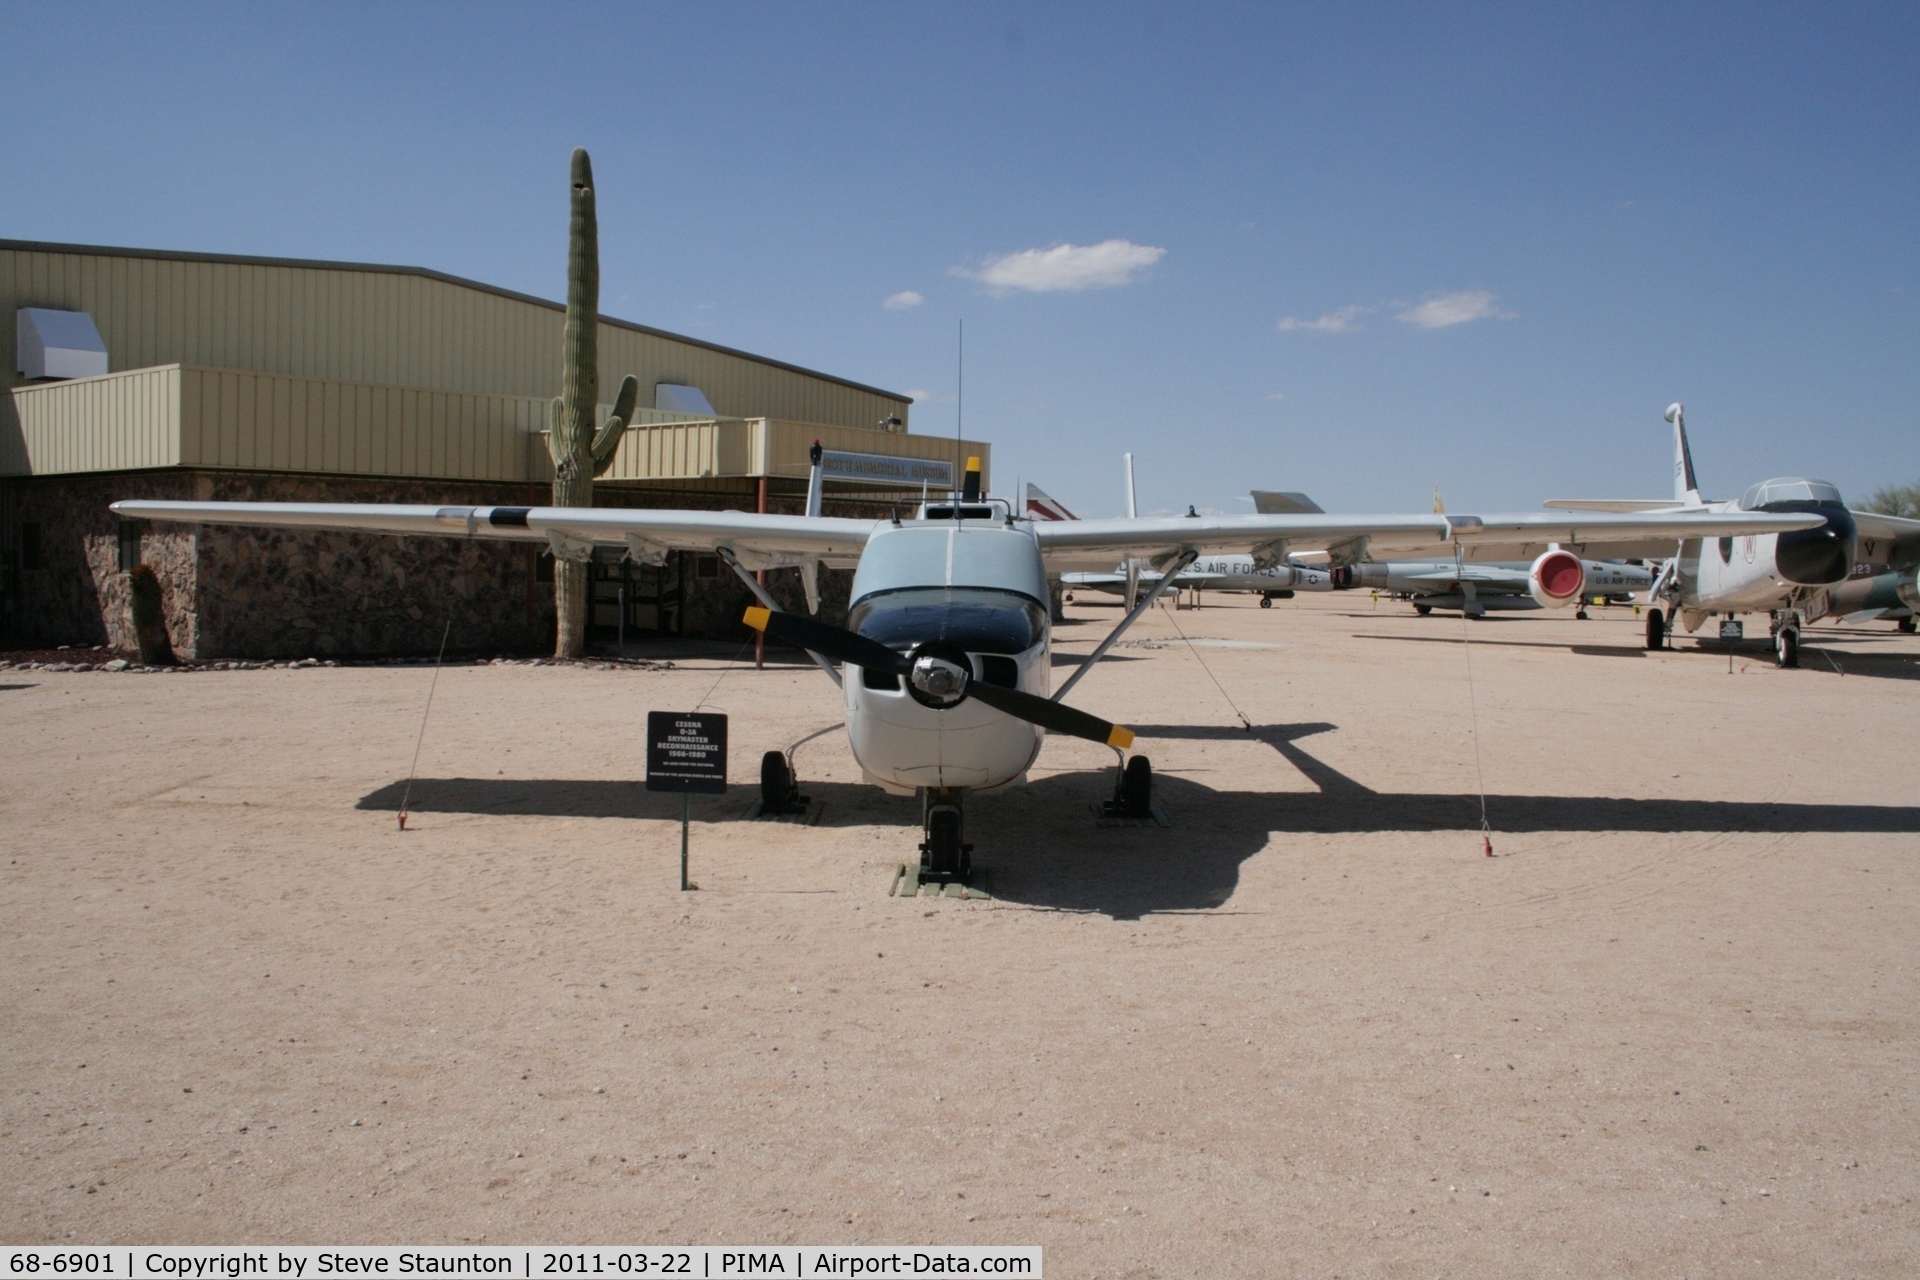 68-6901, Cessna O-2A Super Skymaster Super Skymaster C/N 337M-0190, Taken at Pima Air and Space Museum, in March 2011 whilst on an Aeroprint Aviation tour